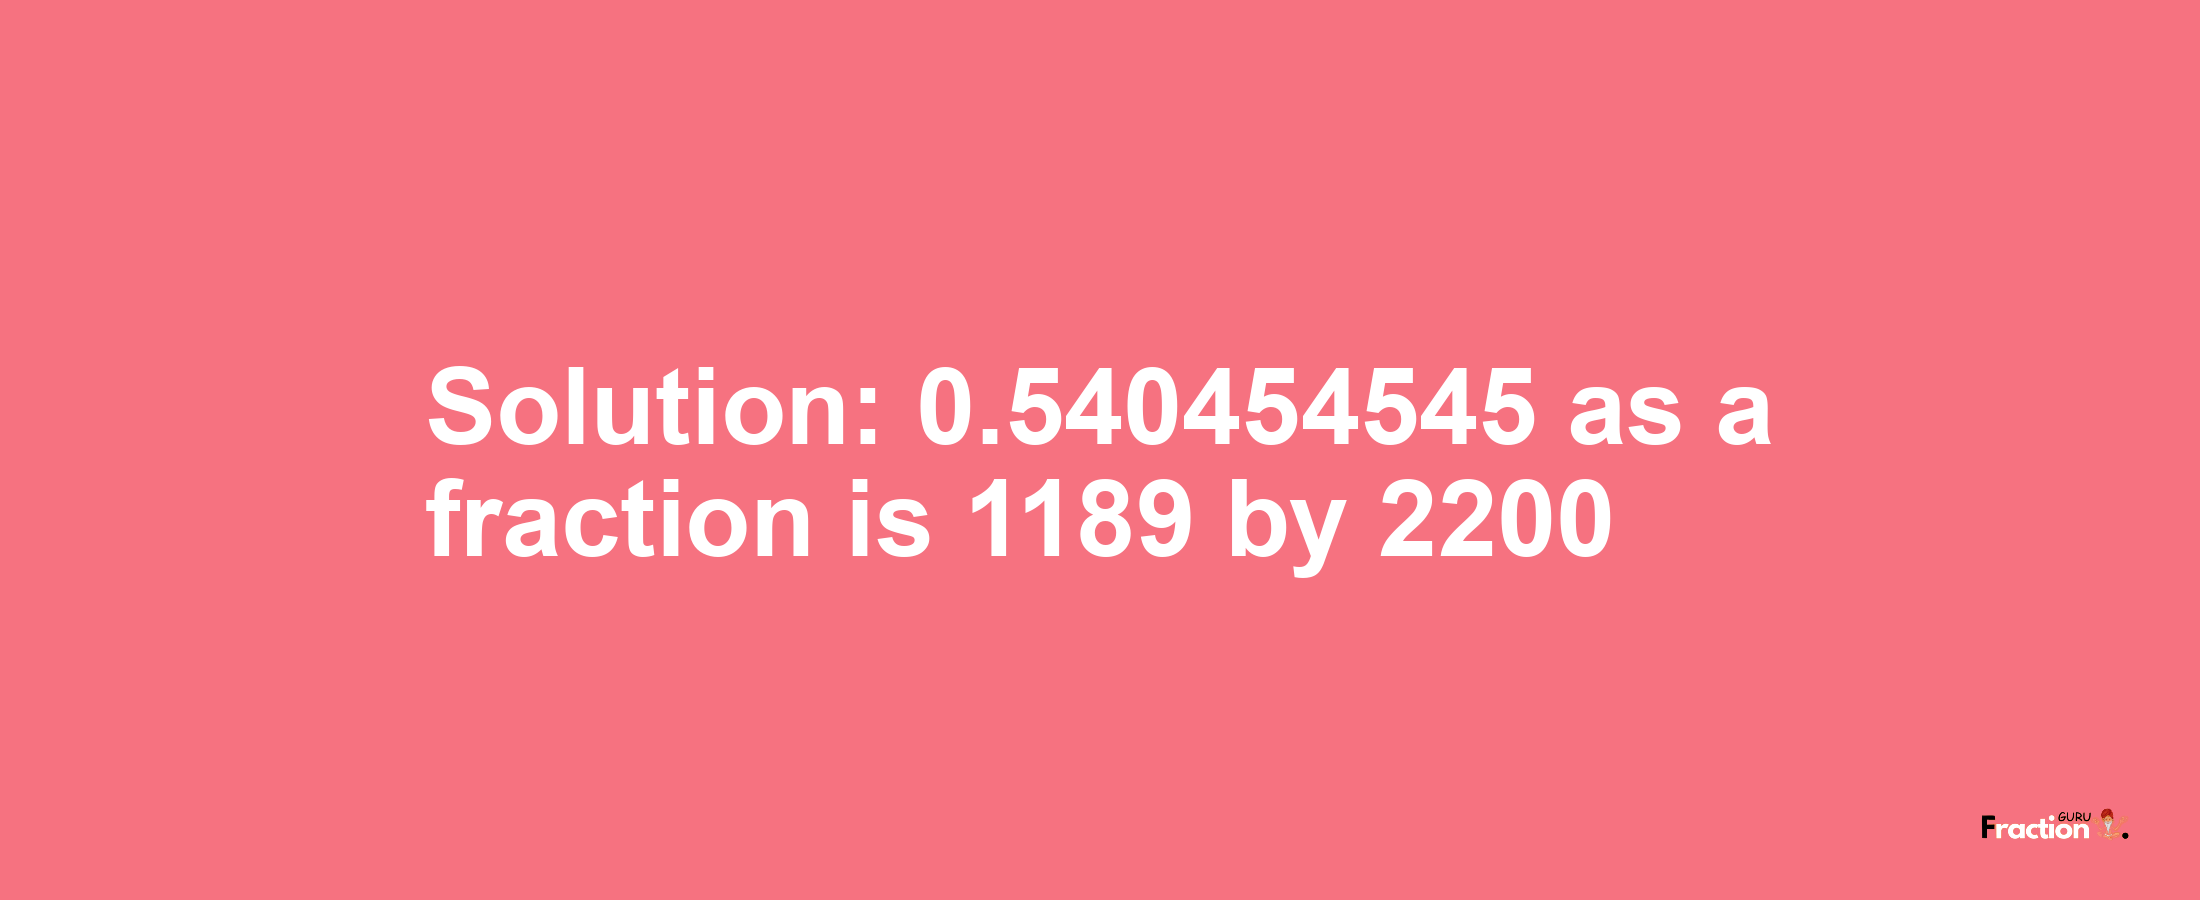 Solution:0.540454545 as a fraction is 1189/2200